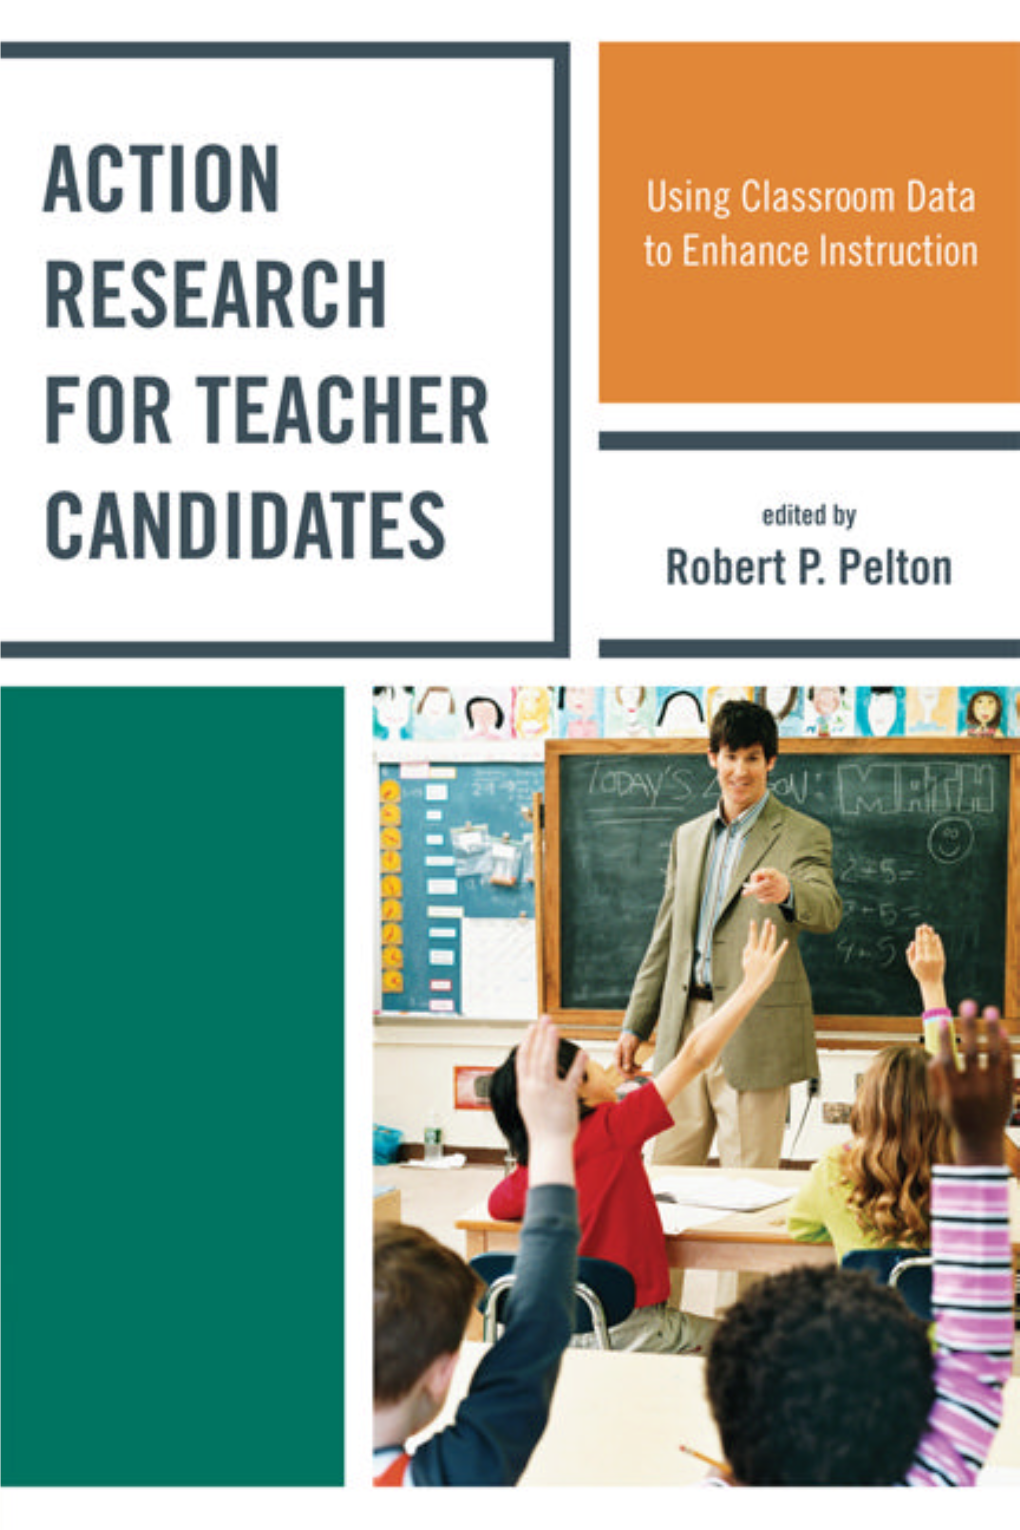 Action Research for Teacher Candidates Using Classroom Data to Enhance Instruction